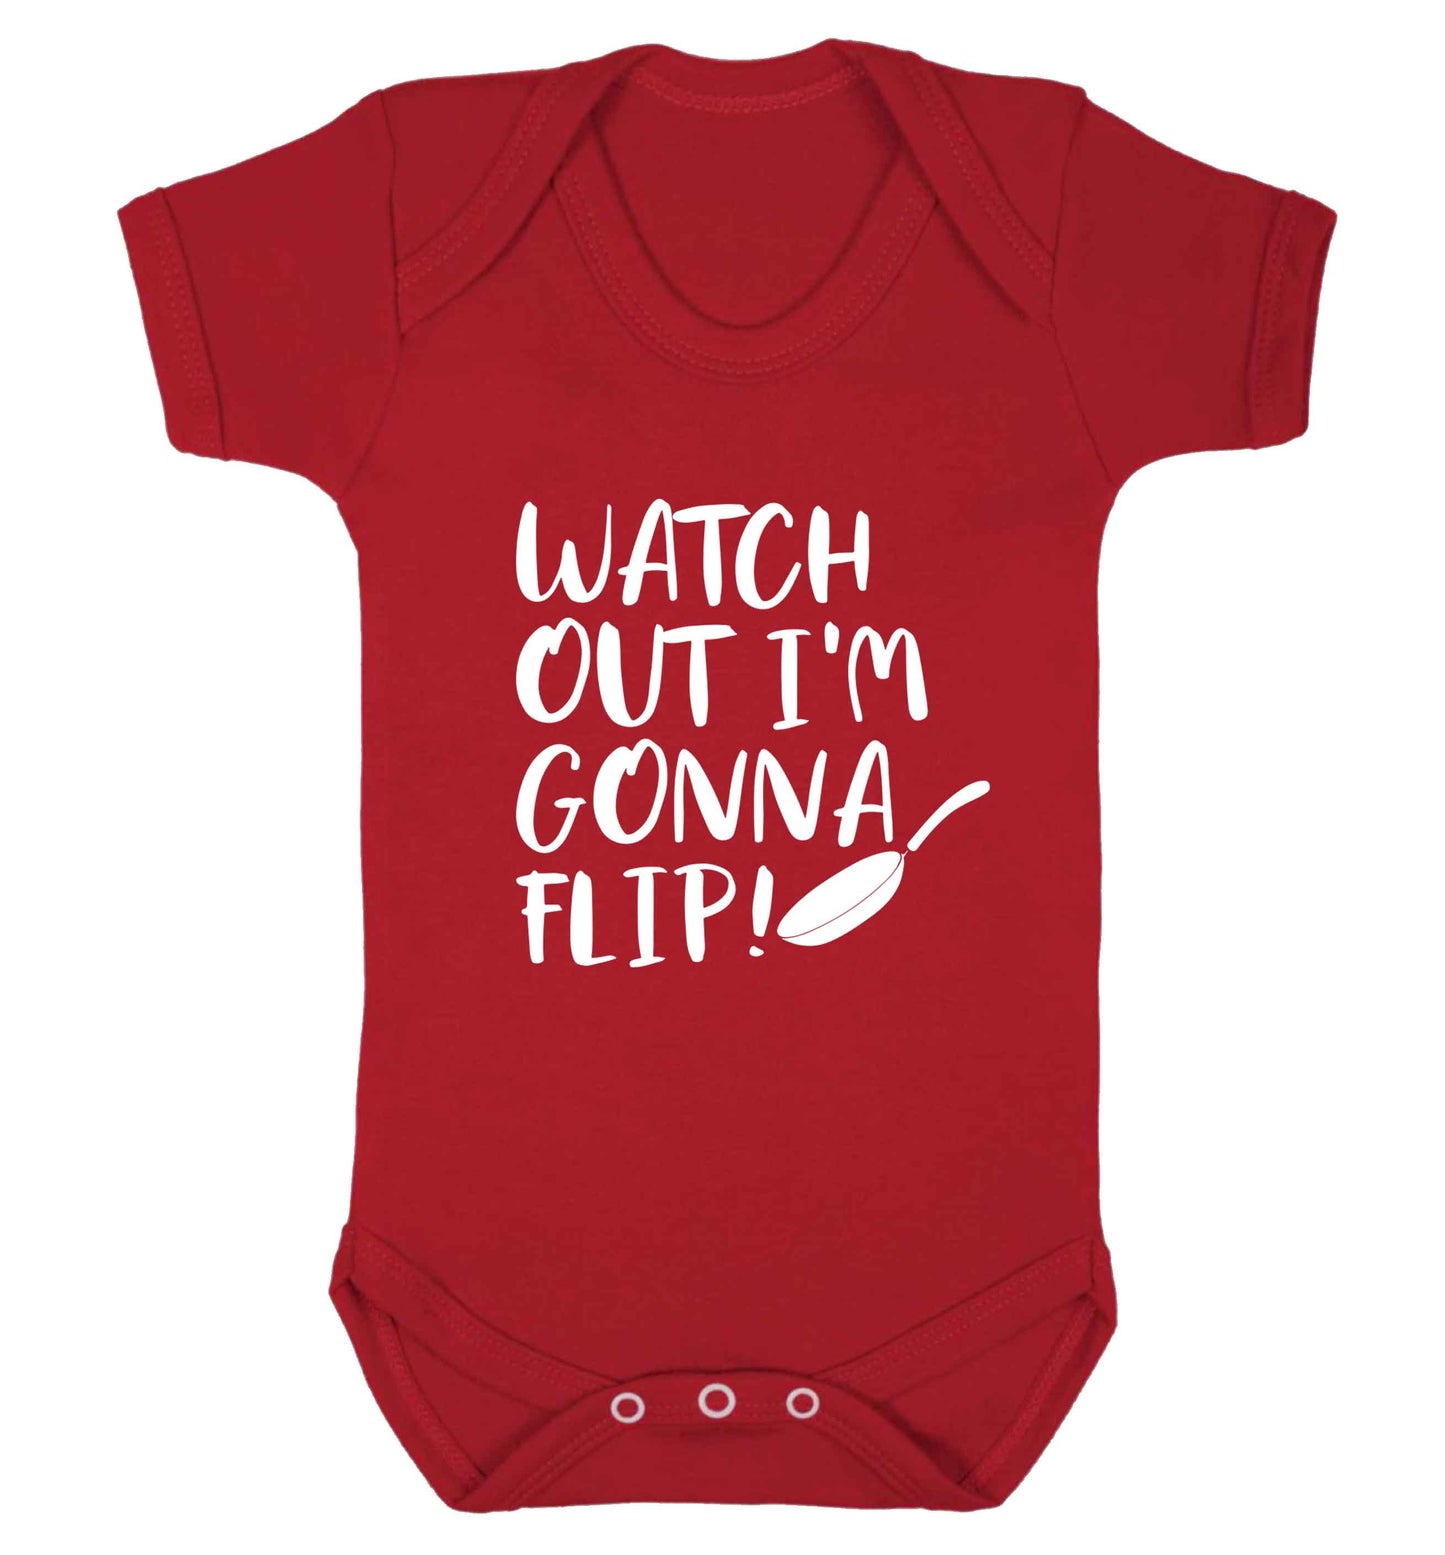 Watch out I'm gonna flip! baby vest red 18-24 months